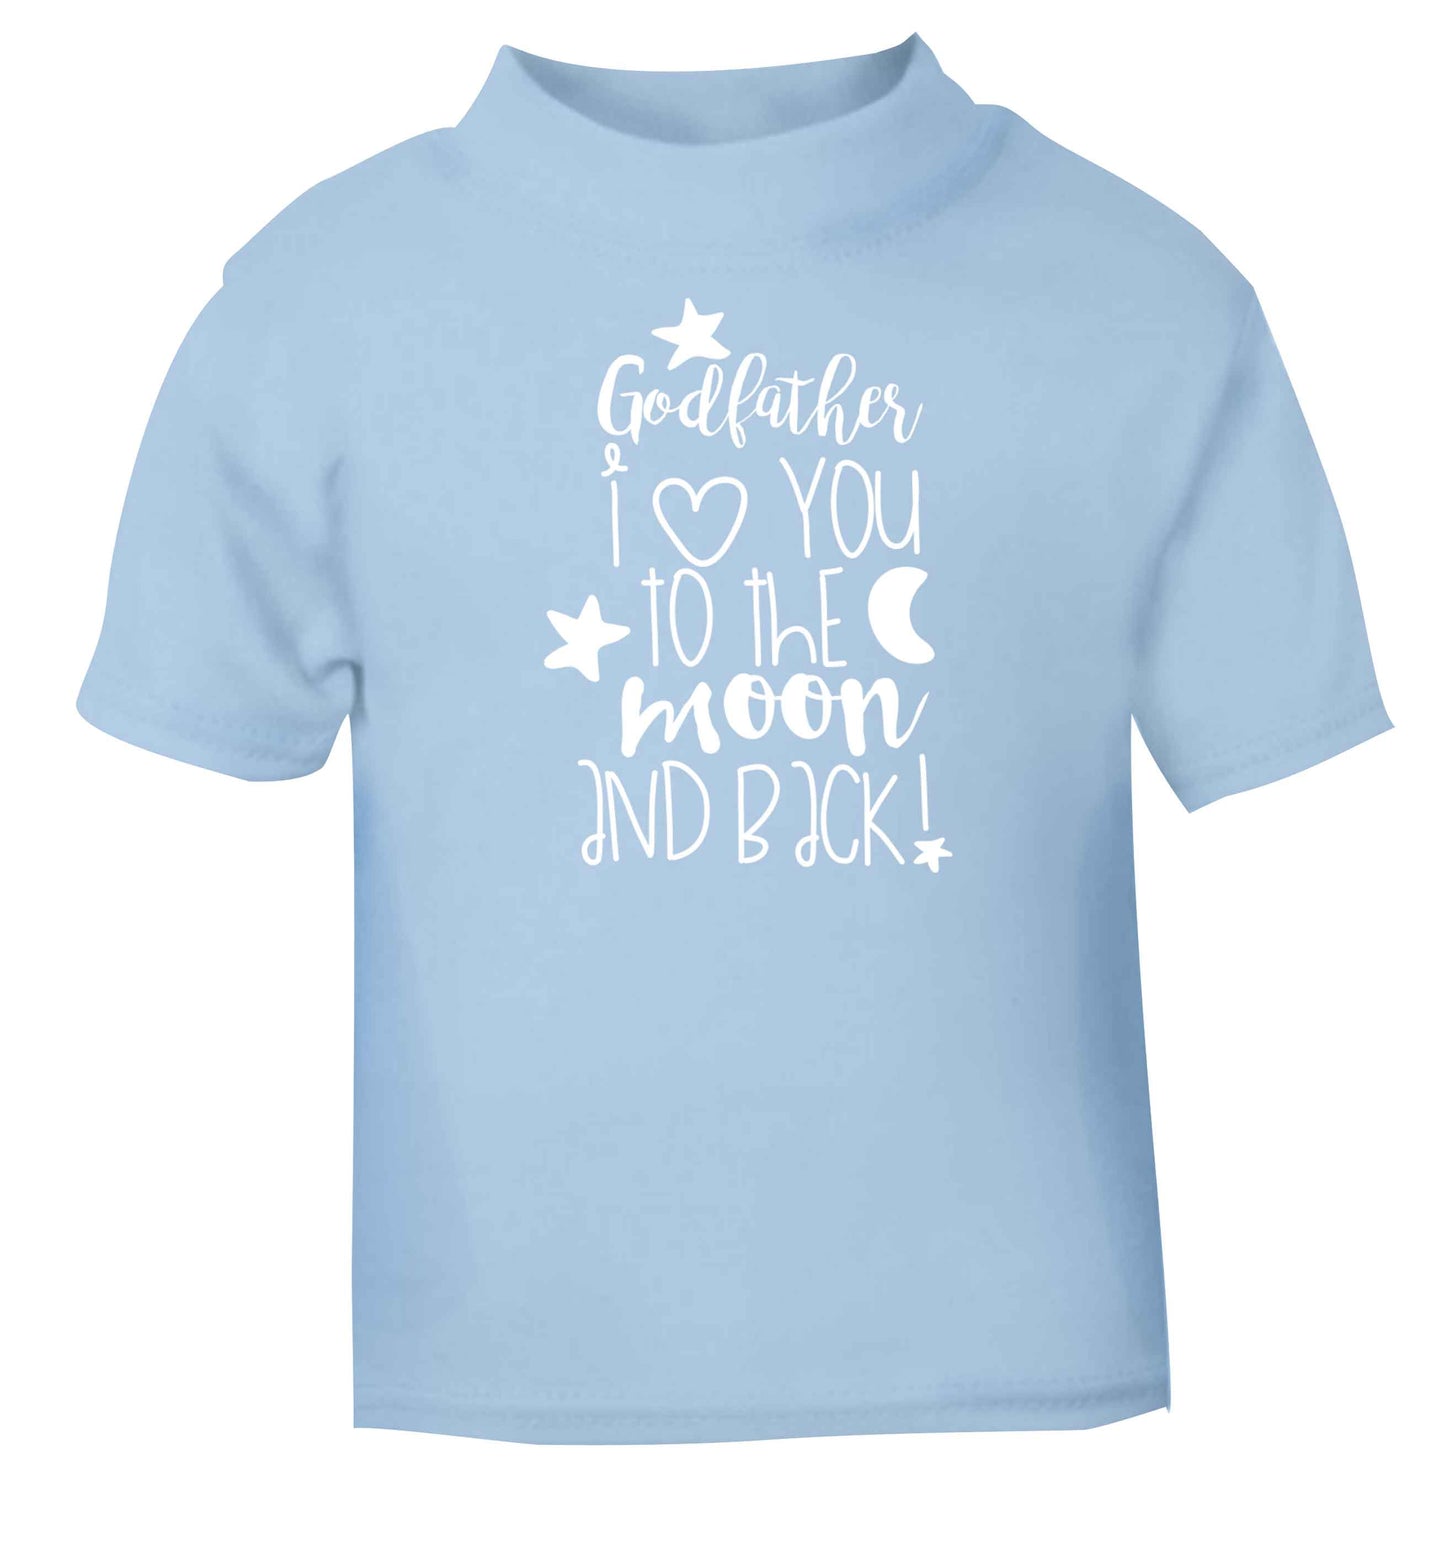 Godfather I love you to the moon and back light blue baby toddler Tshirt 2 Years